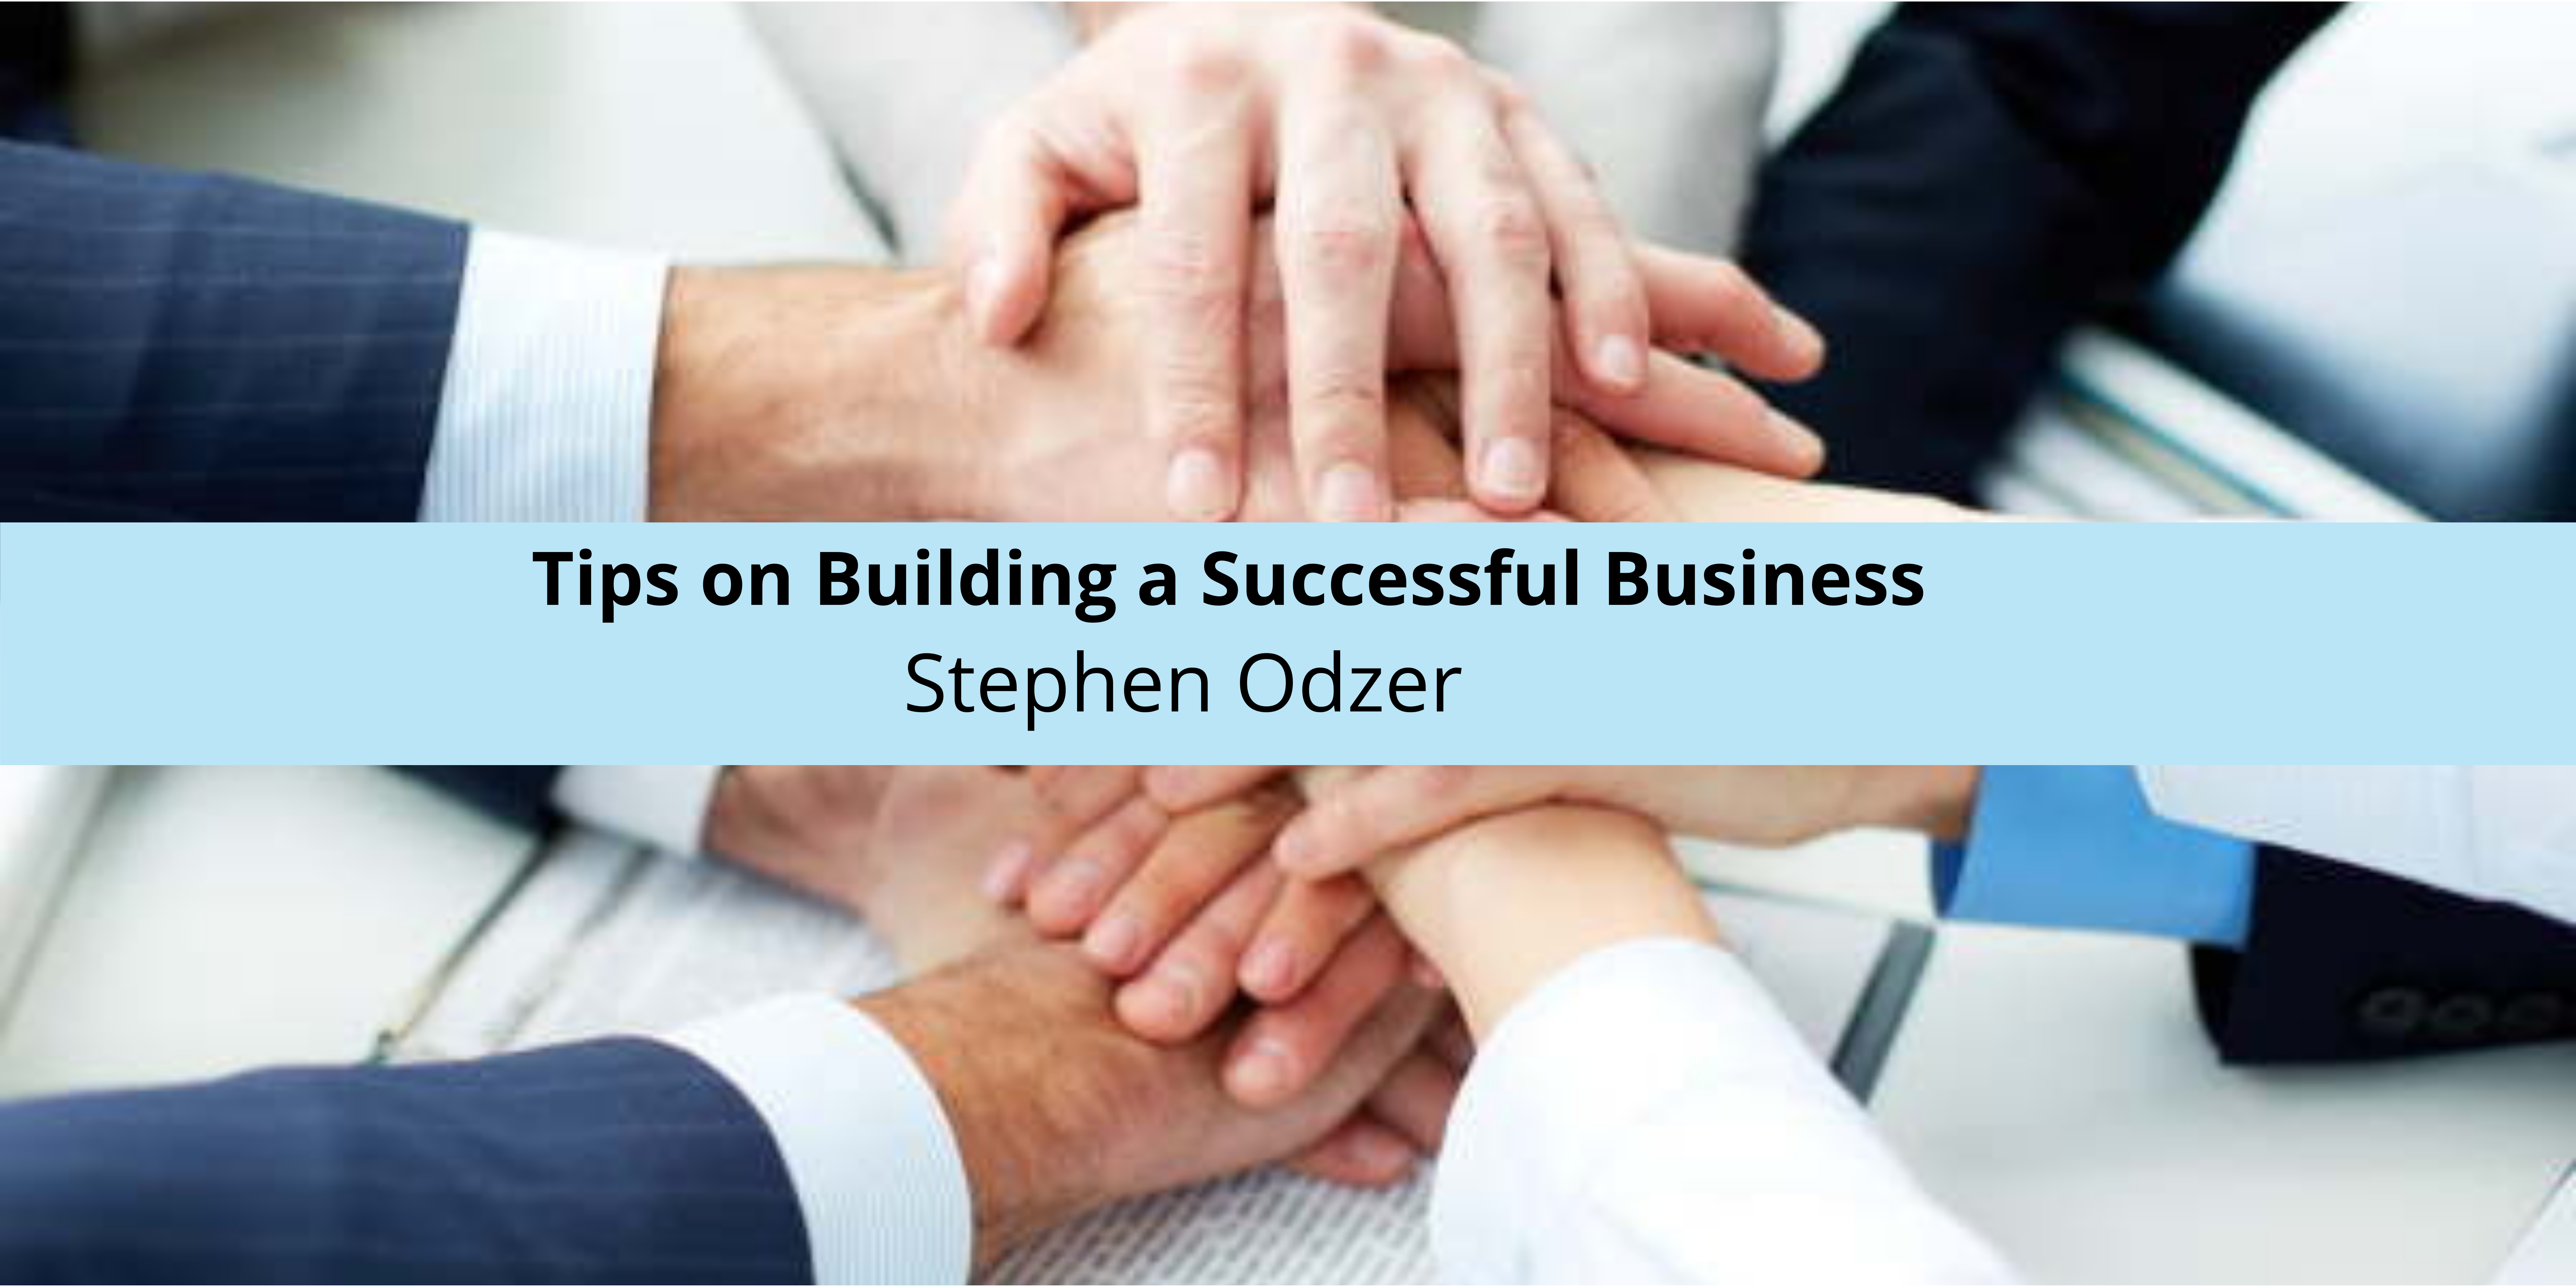 Stephen Odzer Shares Tips on Building a Successful Business